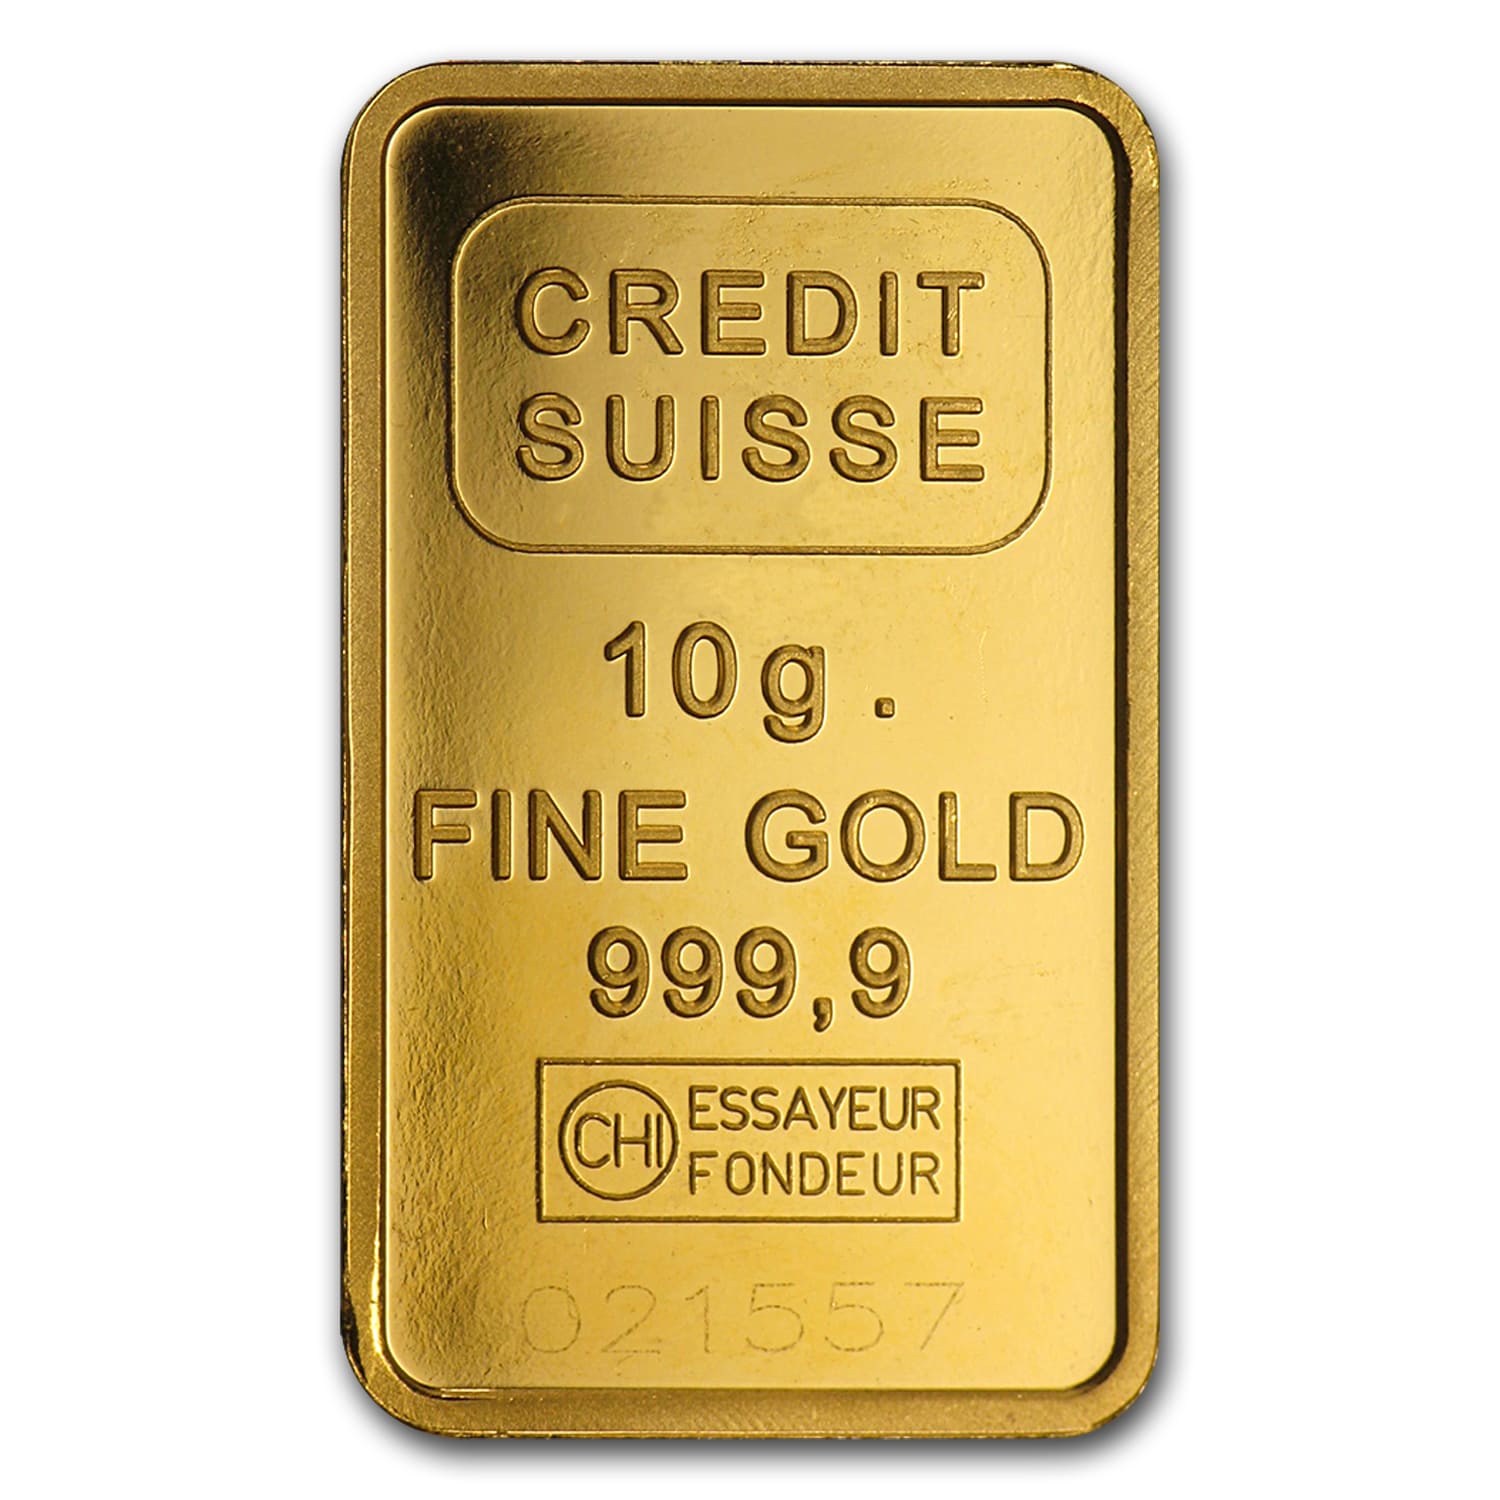 how big can a credit suisse gold bar be